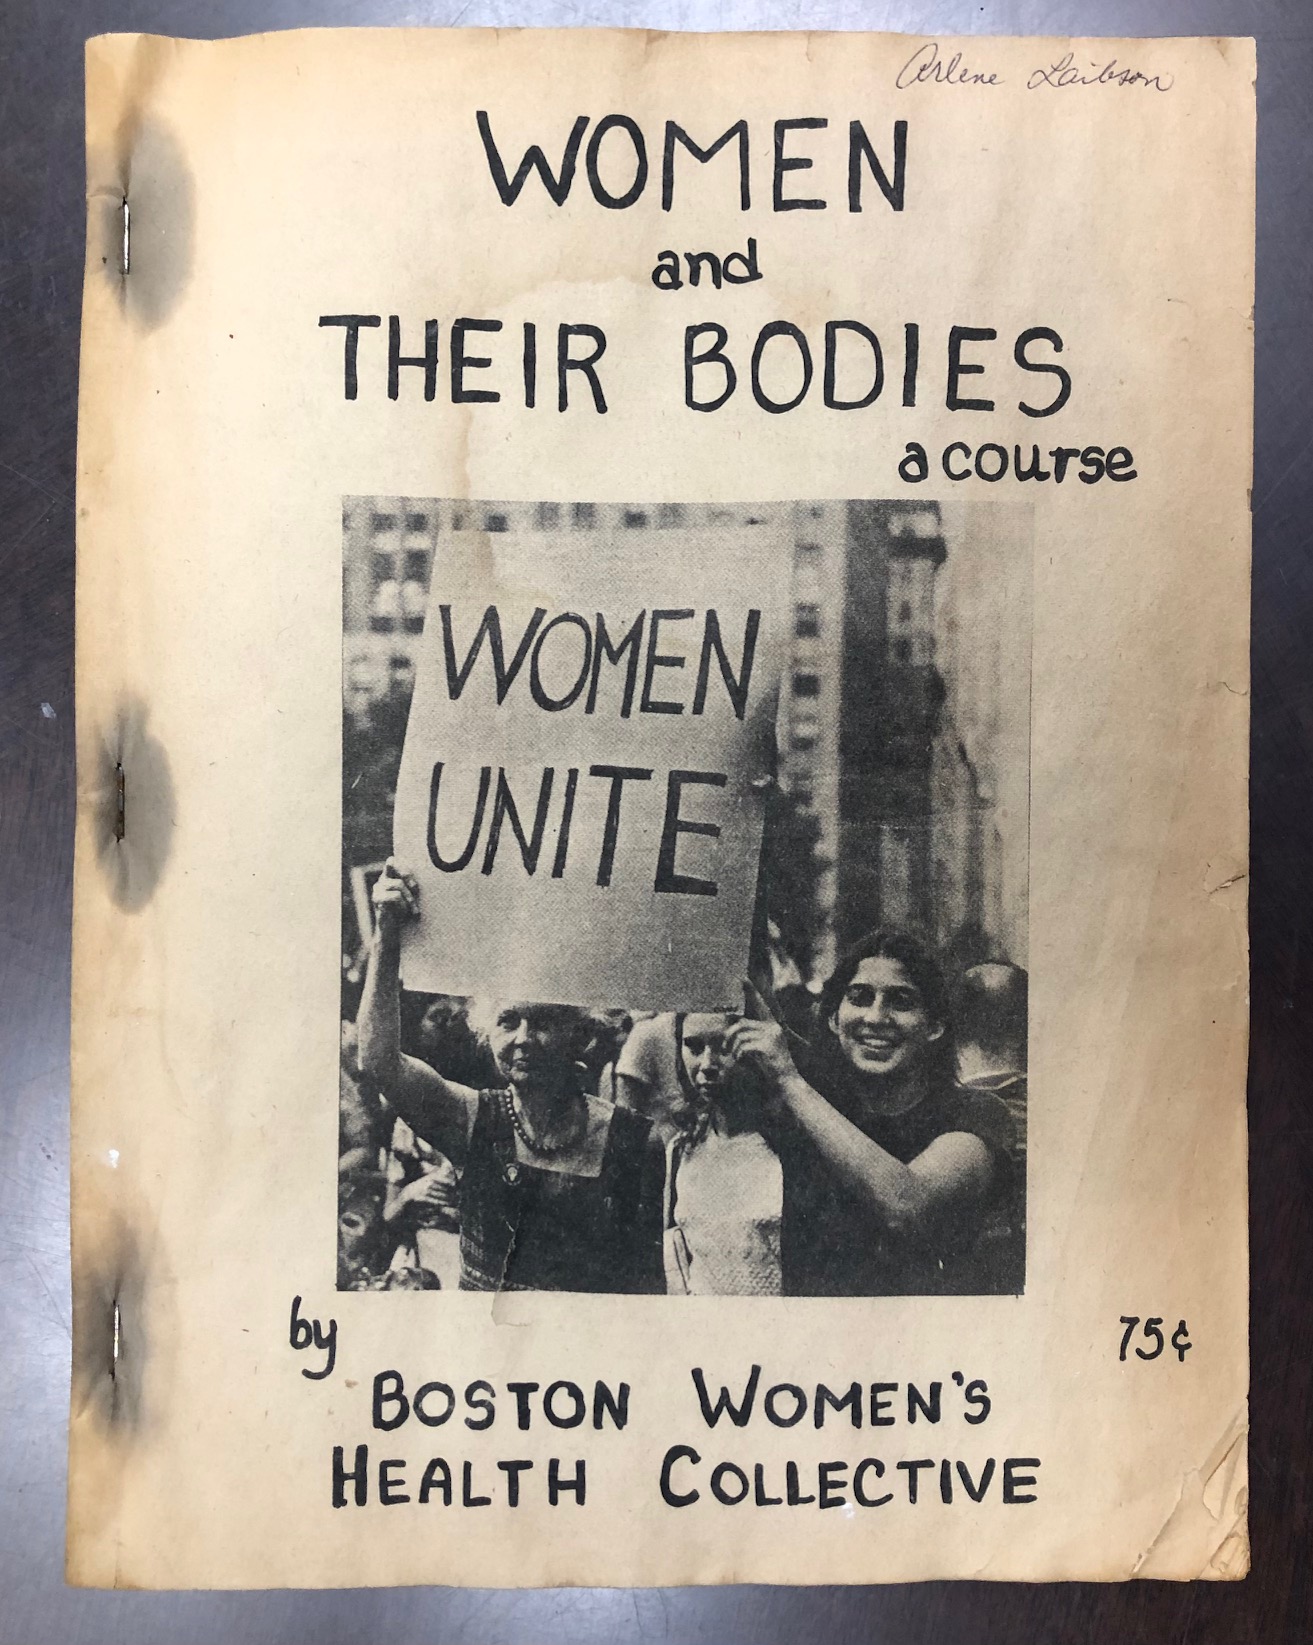 Women and Their Bodies